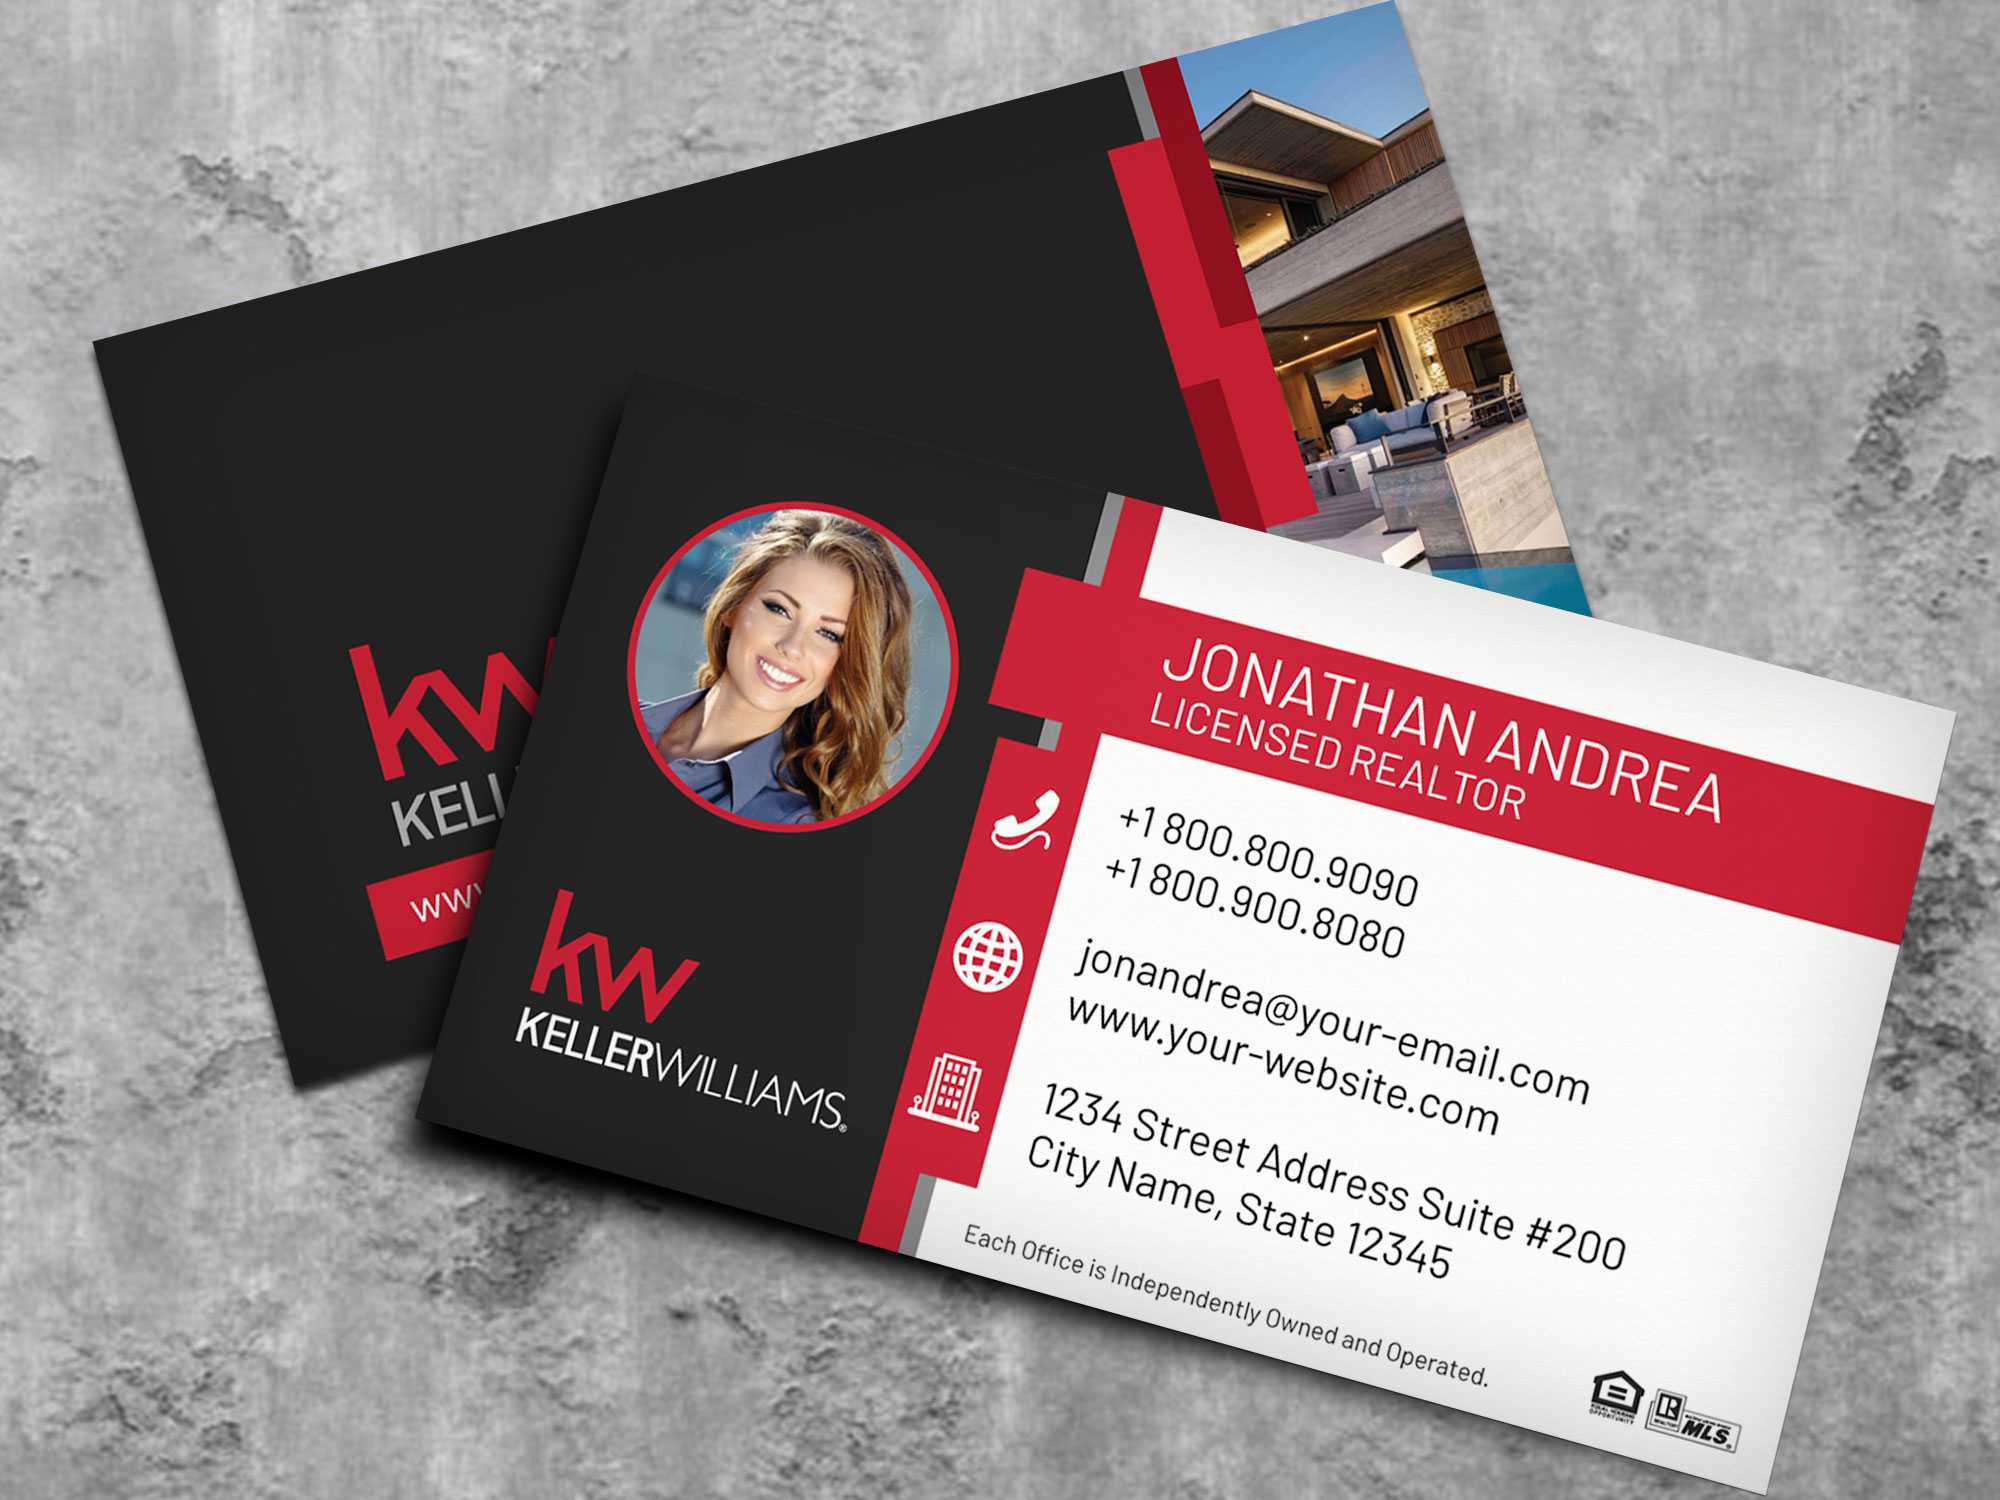 Keller Williams Business Card Template Bc19702Kw With Regard To Keller Williams Business Card Templates